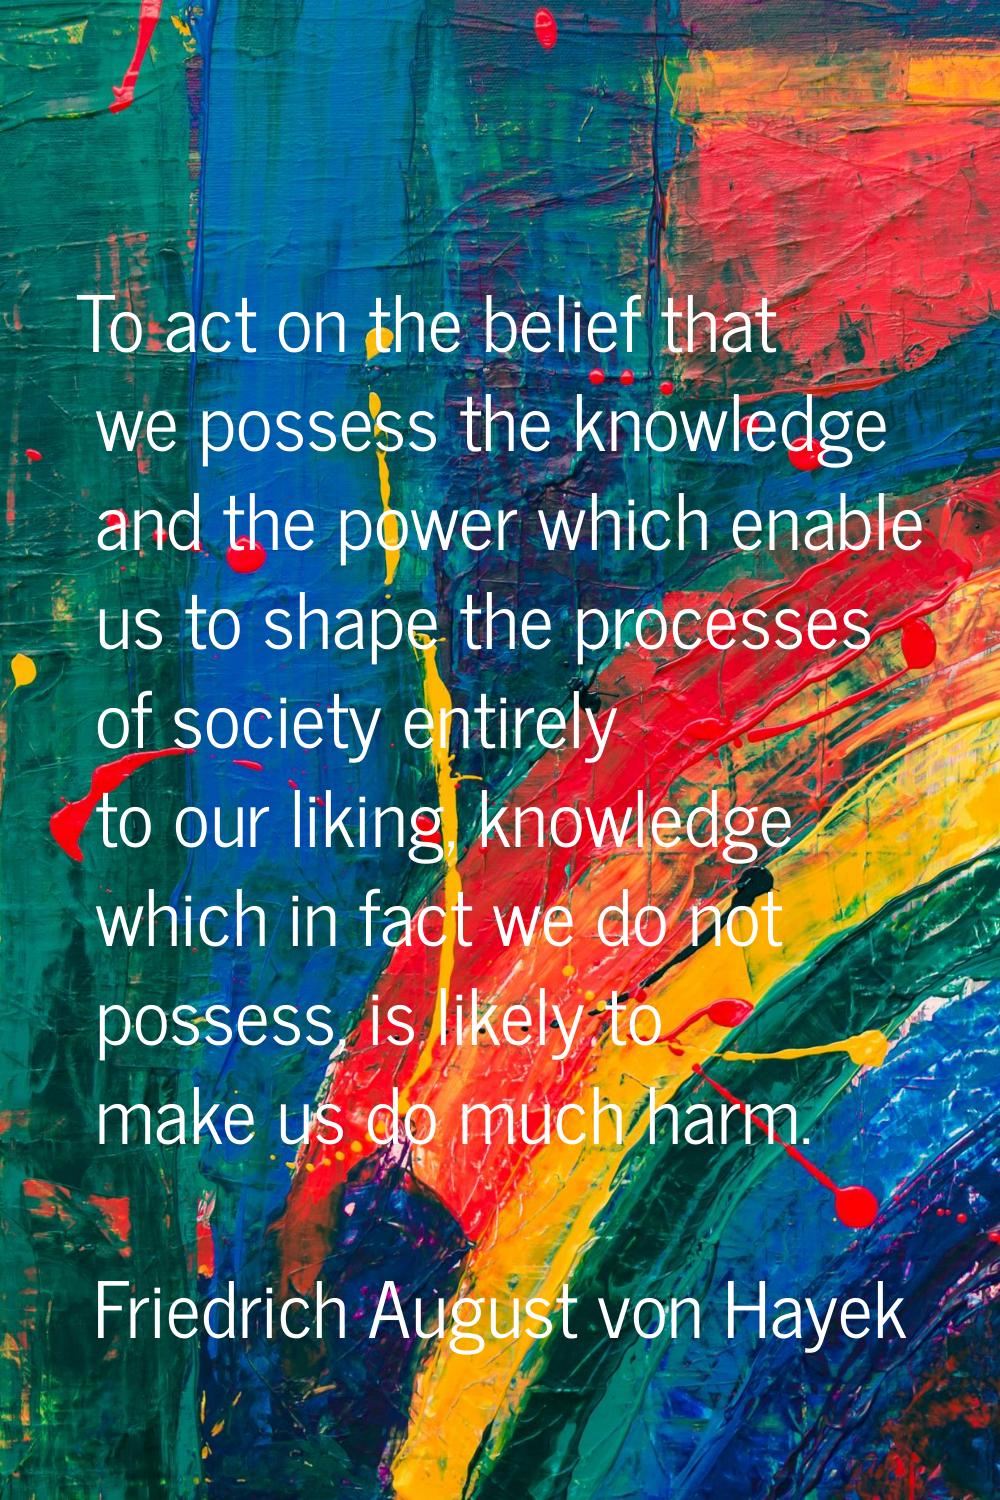 To act on the belief that we possess the knowledge and the power which enable us to shape the proce